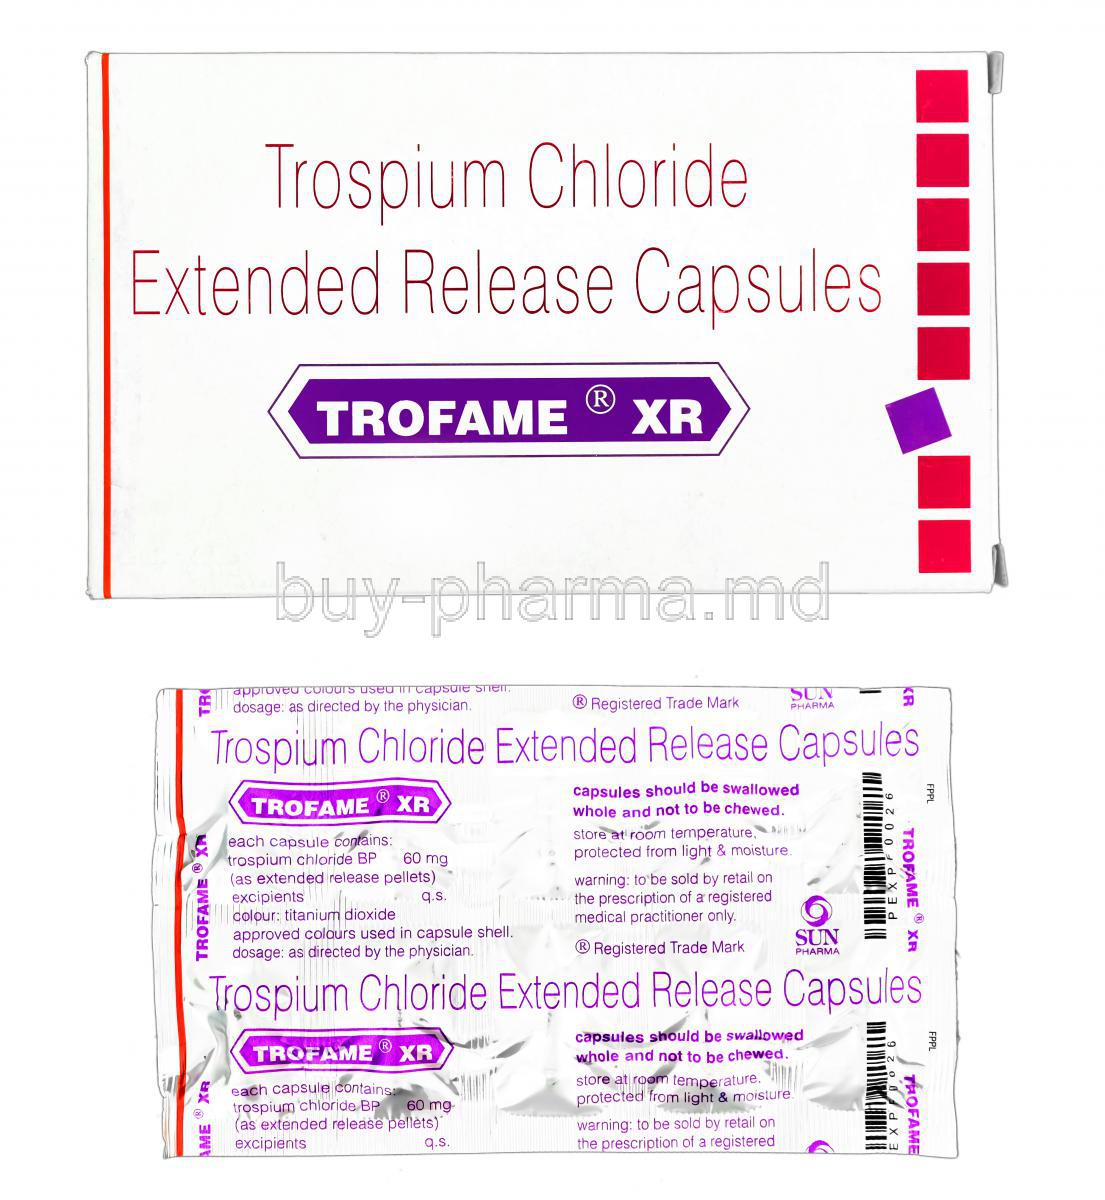 Trofame XR, Trospium Chloride 60mg Extended Release